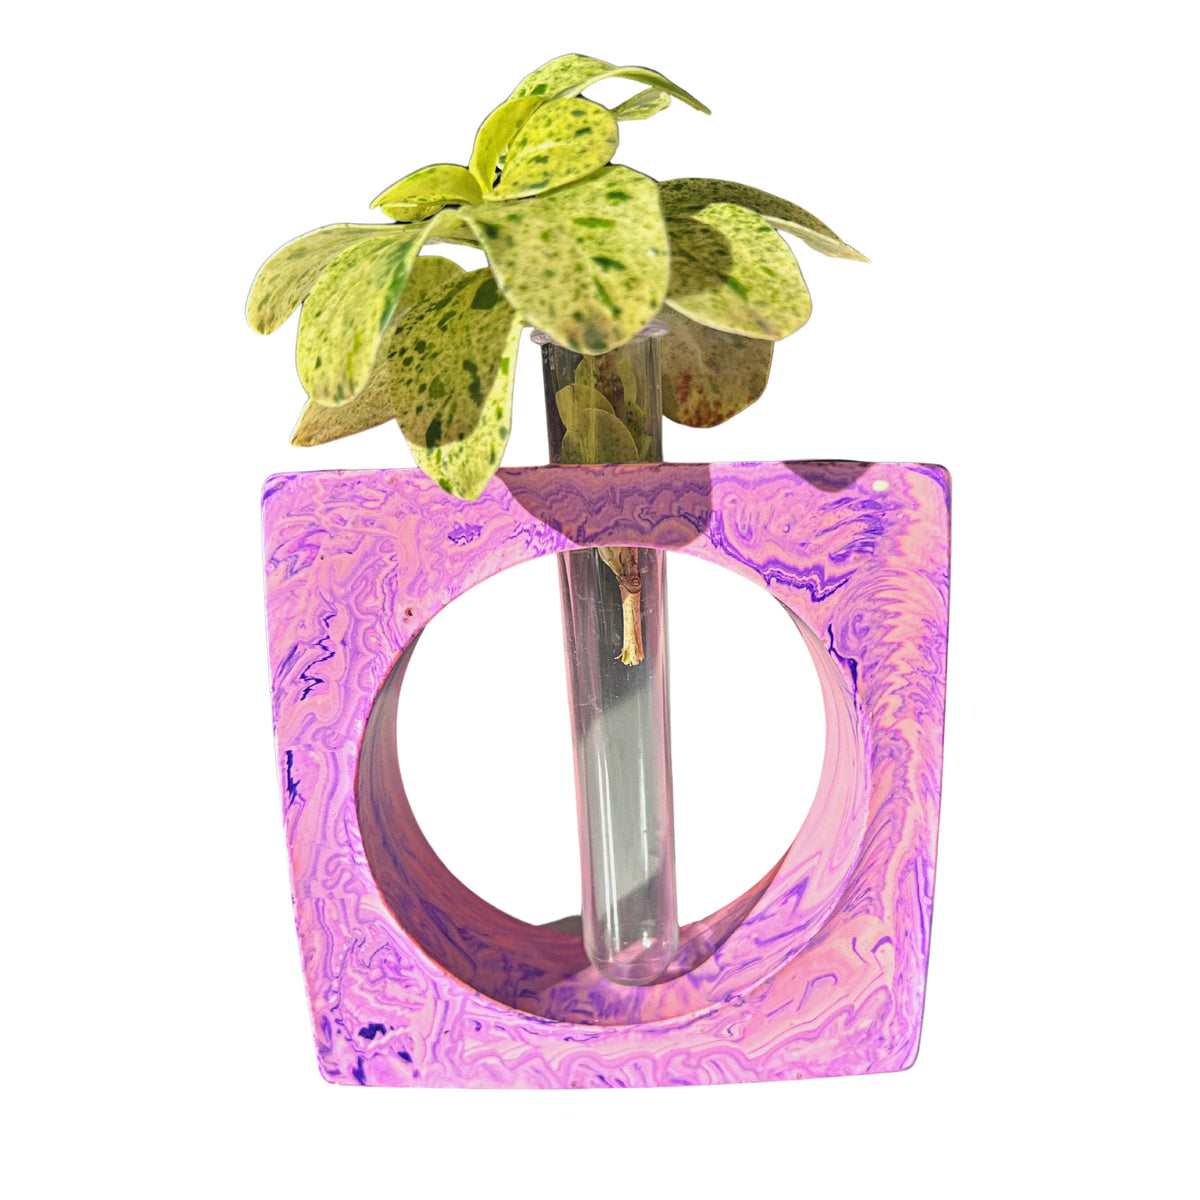 A sustainable handmade resin planters propagation station, a stylish addition to eco-friendly homeware